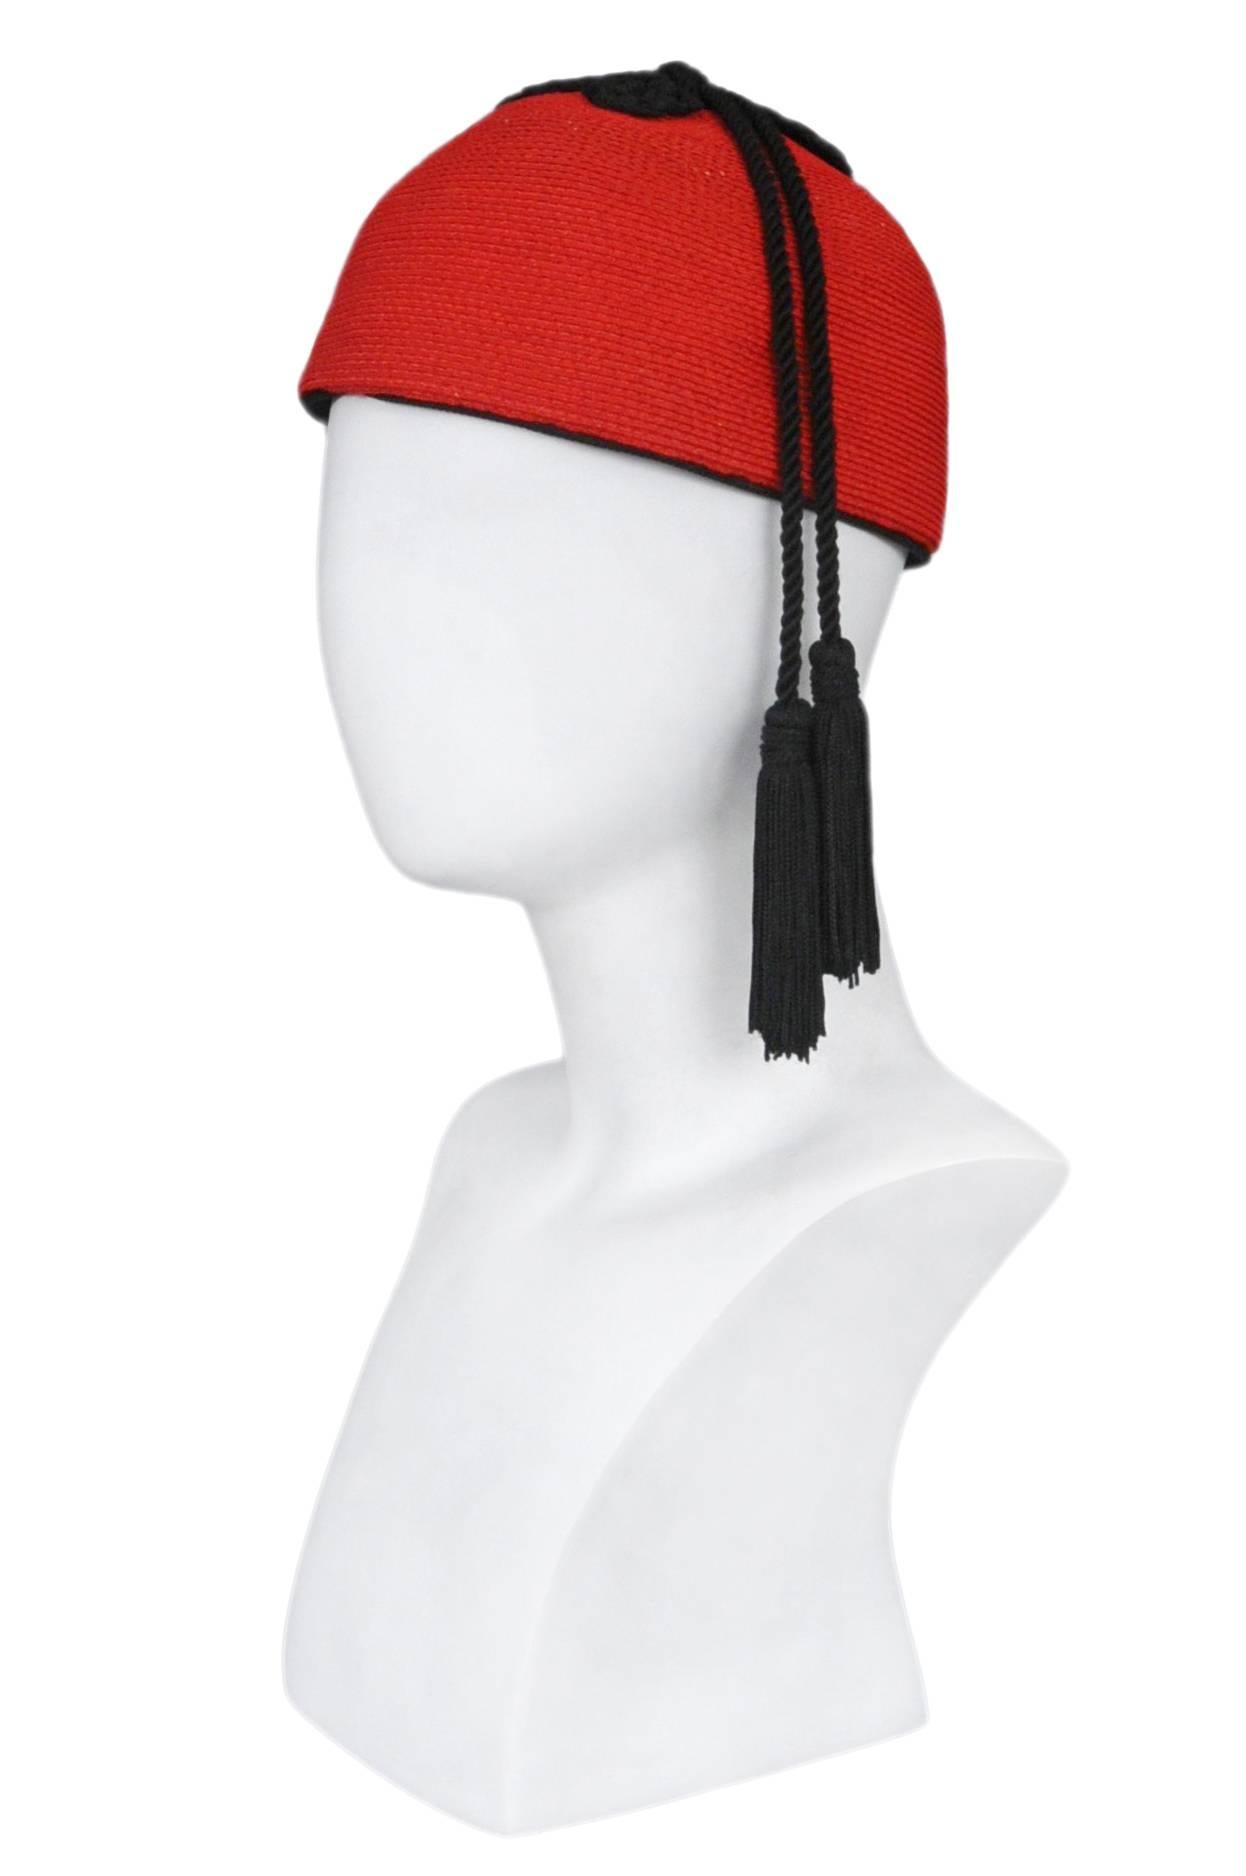 Resurrection Vintage is excited to offer a vintage Yves Saint Laurent red raffia cap hat with two black tassels and trim. Circa 1976. Iconic and in excellent condition. 

Yves Saint Laurent
Size: Diameter 7.5 in, Height 4.5 in, Tassel Length 12 in.